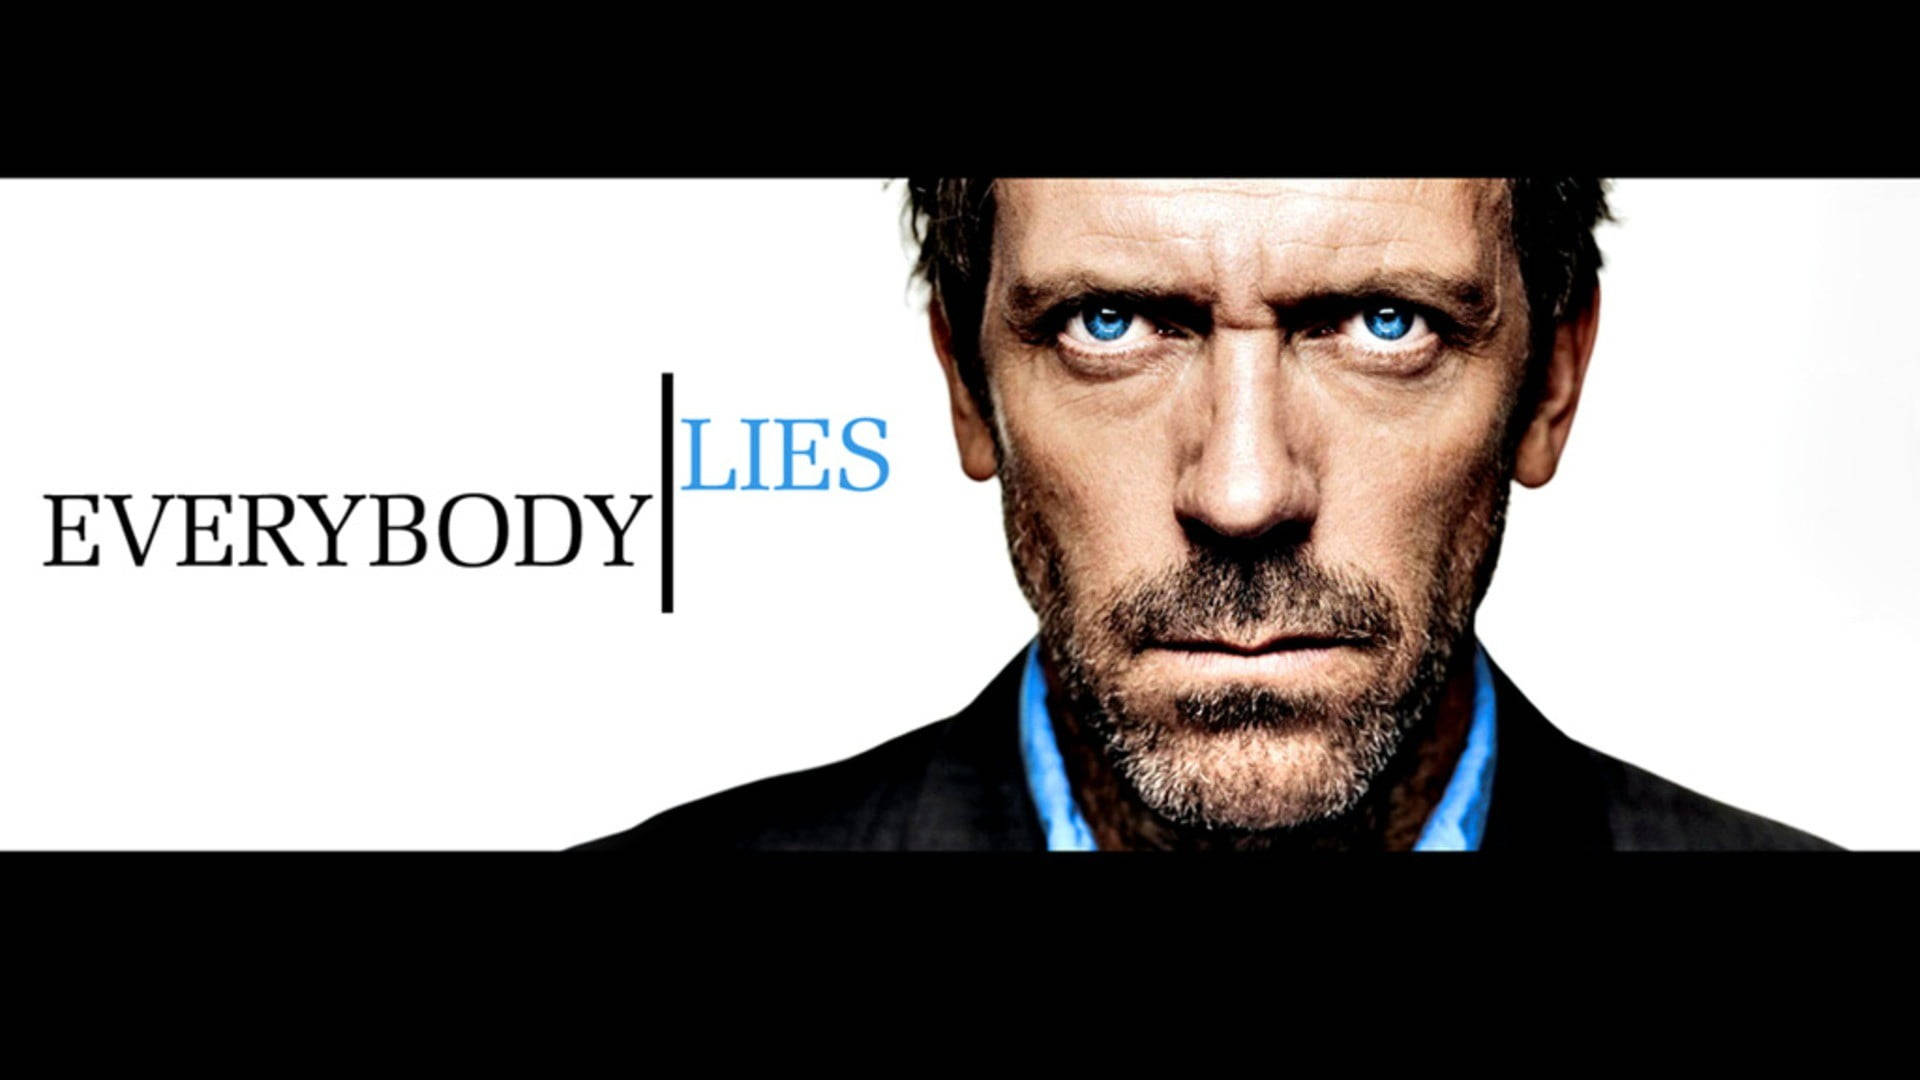 Dr. Gregory House - Everybody Lies Background